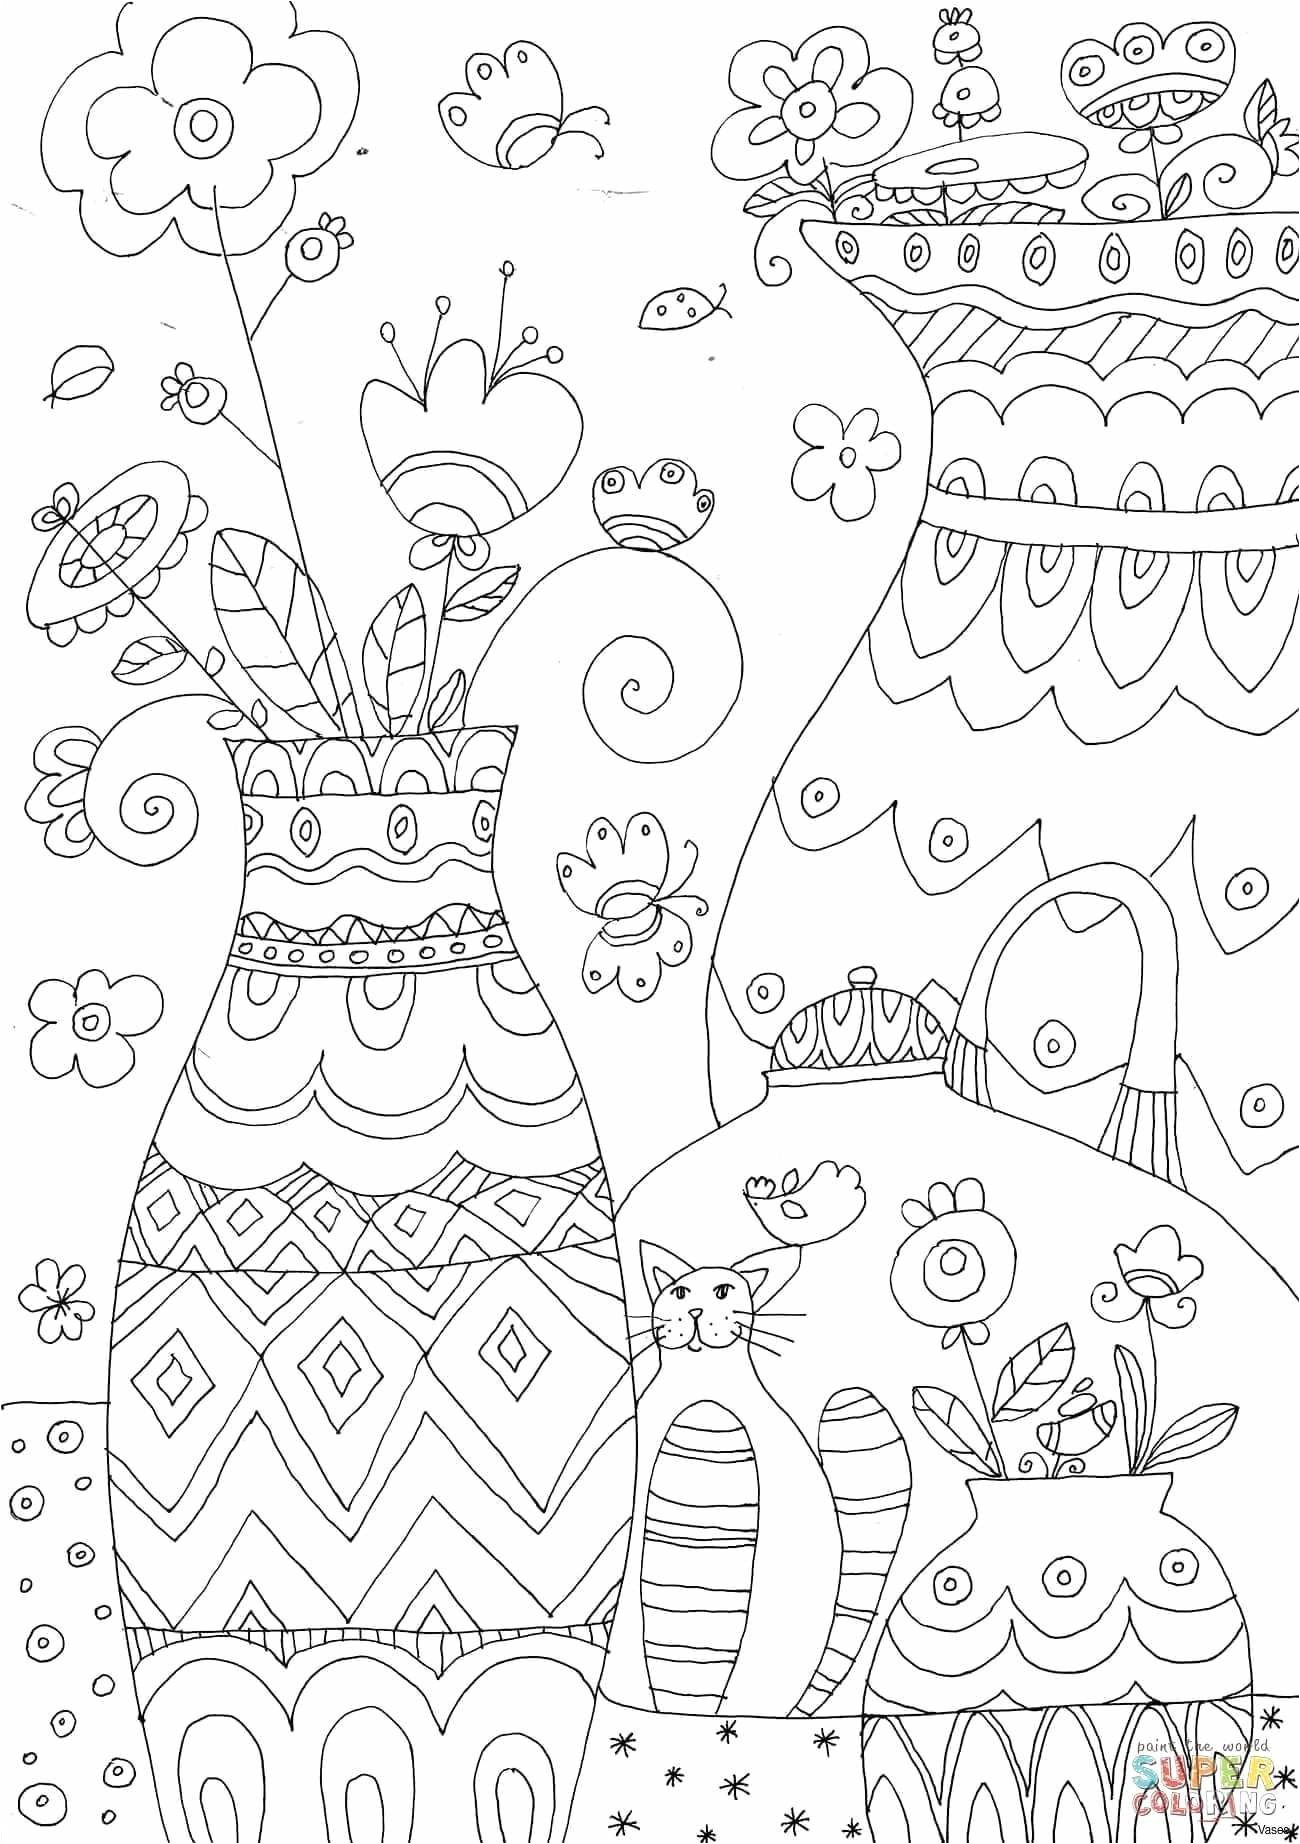 coloriage licorne kawaii de luxe coloriage donuts new coloring page image result for coloriage donut des images of coloriage licorne kawaii